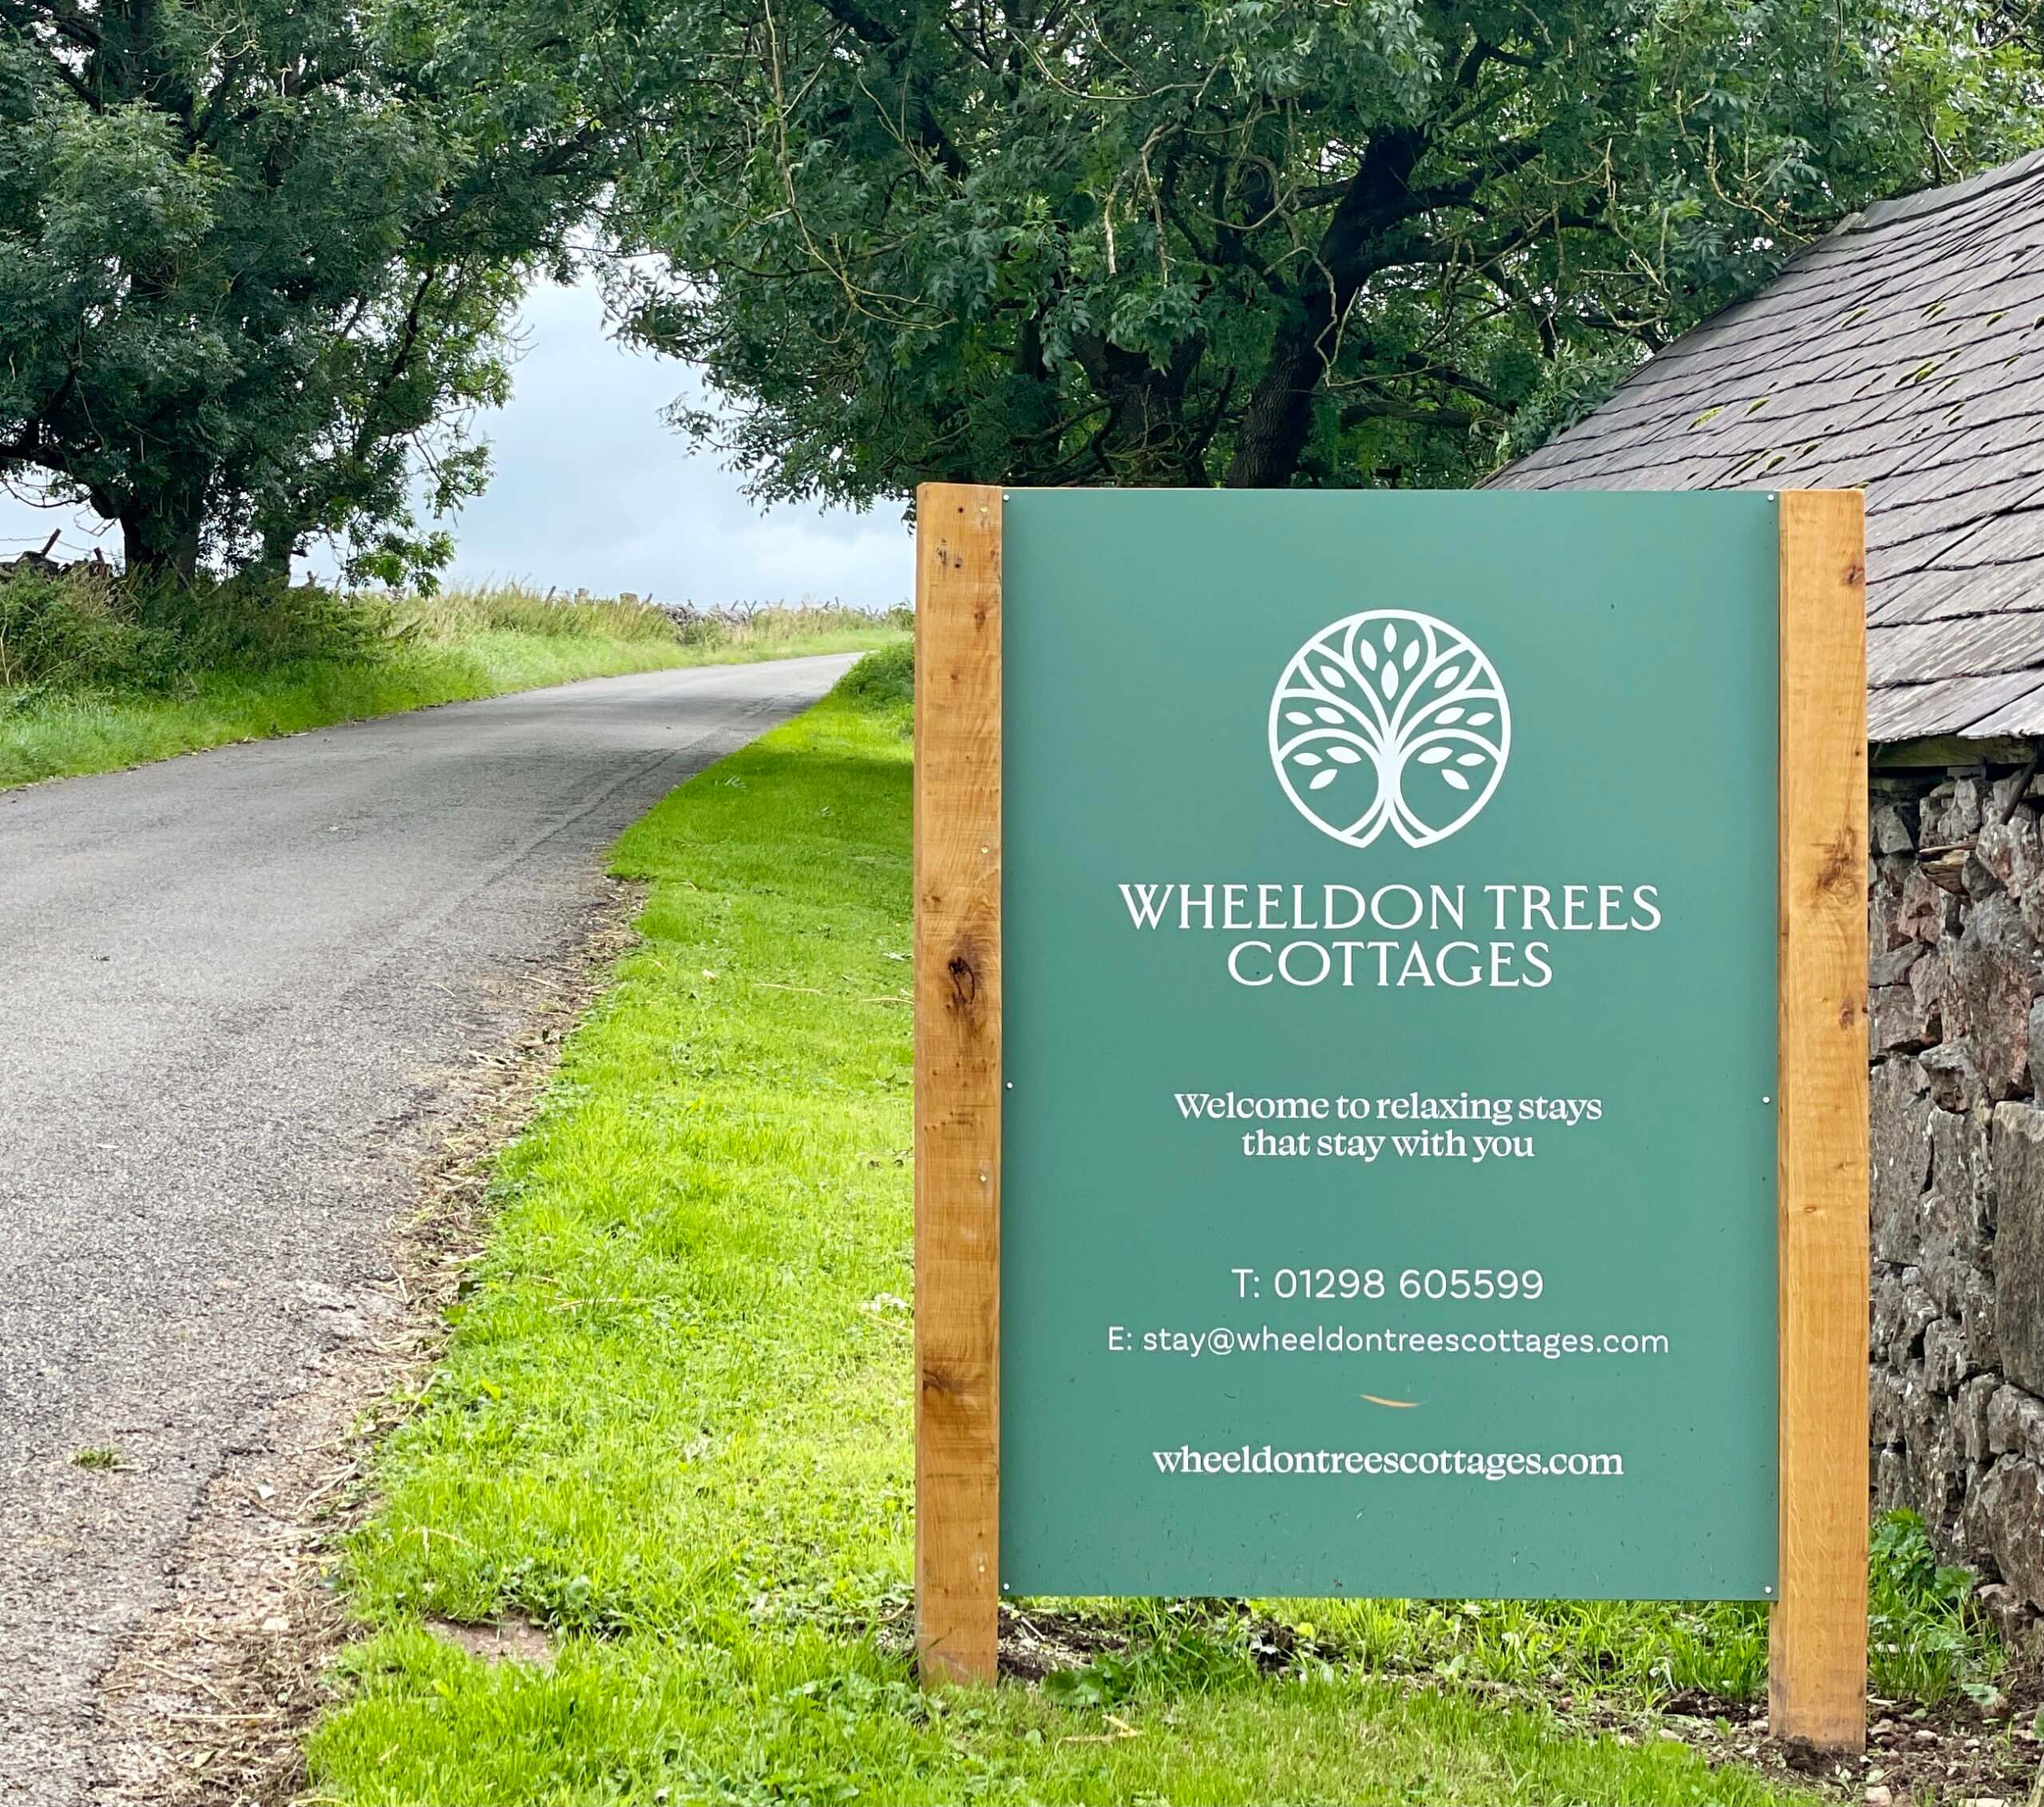 Thank You From Wheeldon Trees Cottages